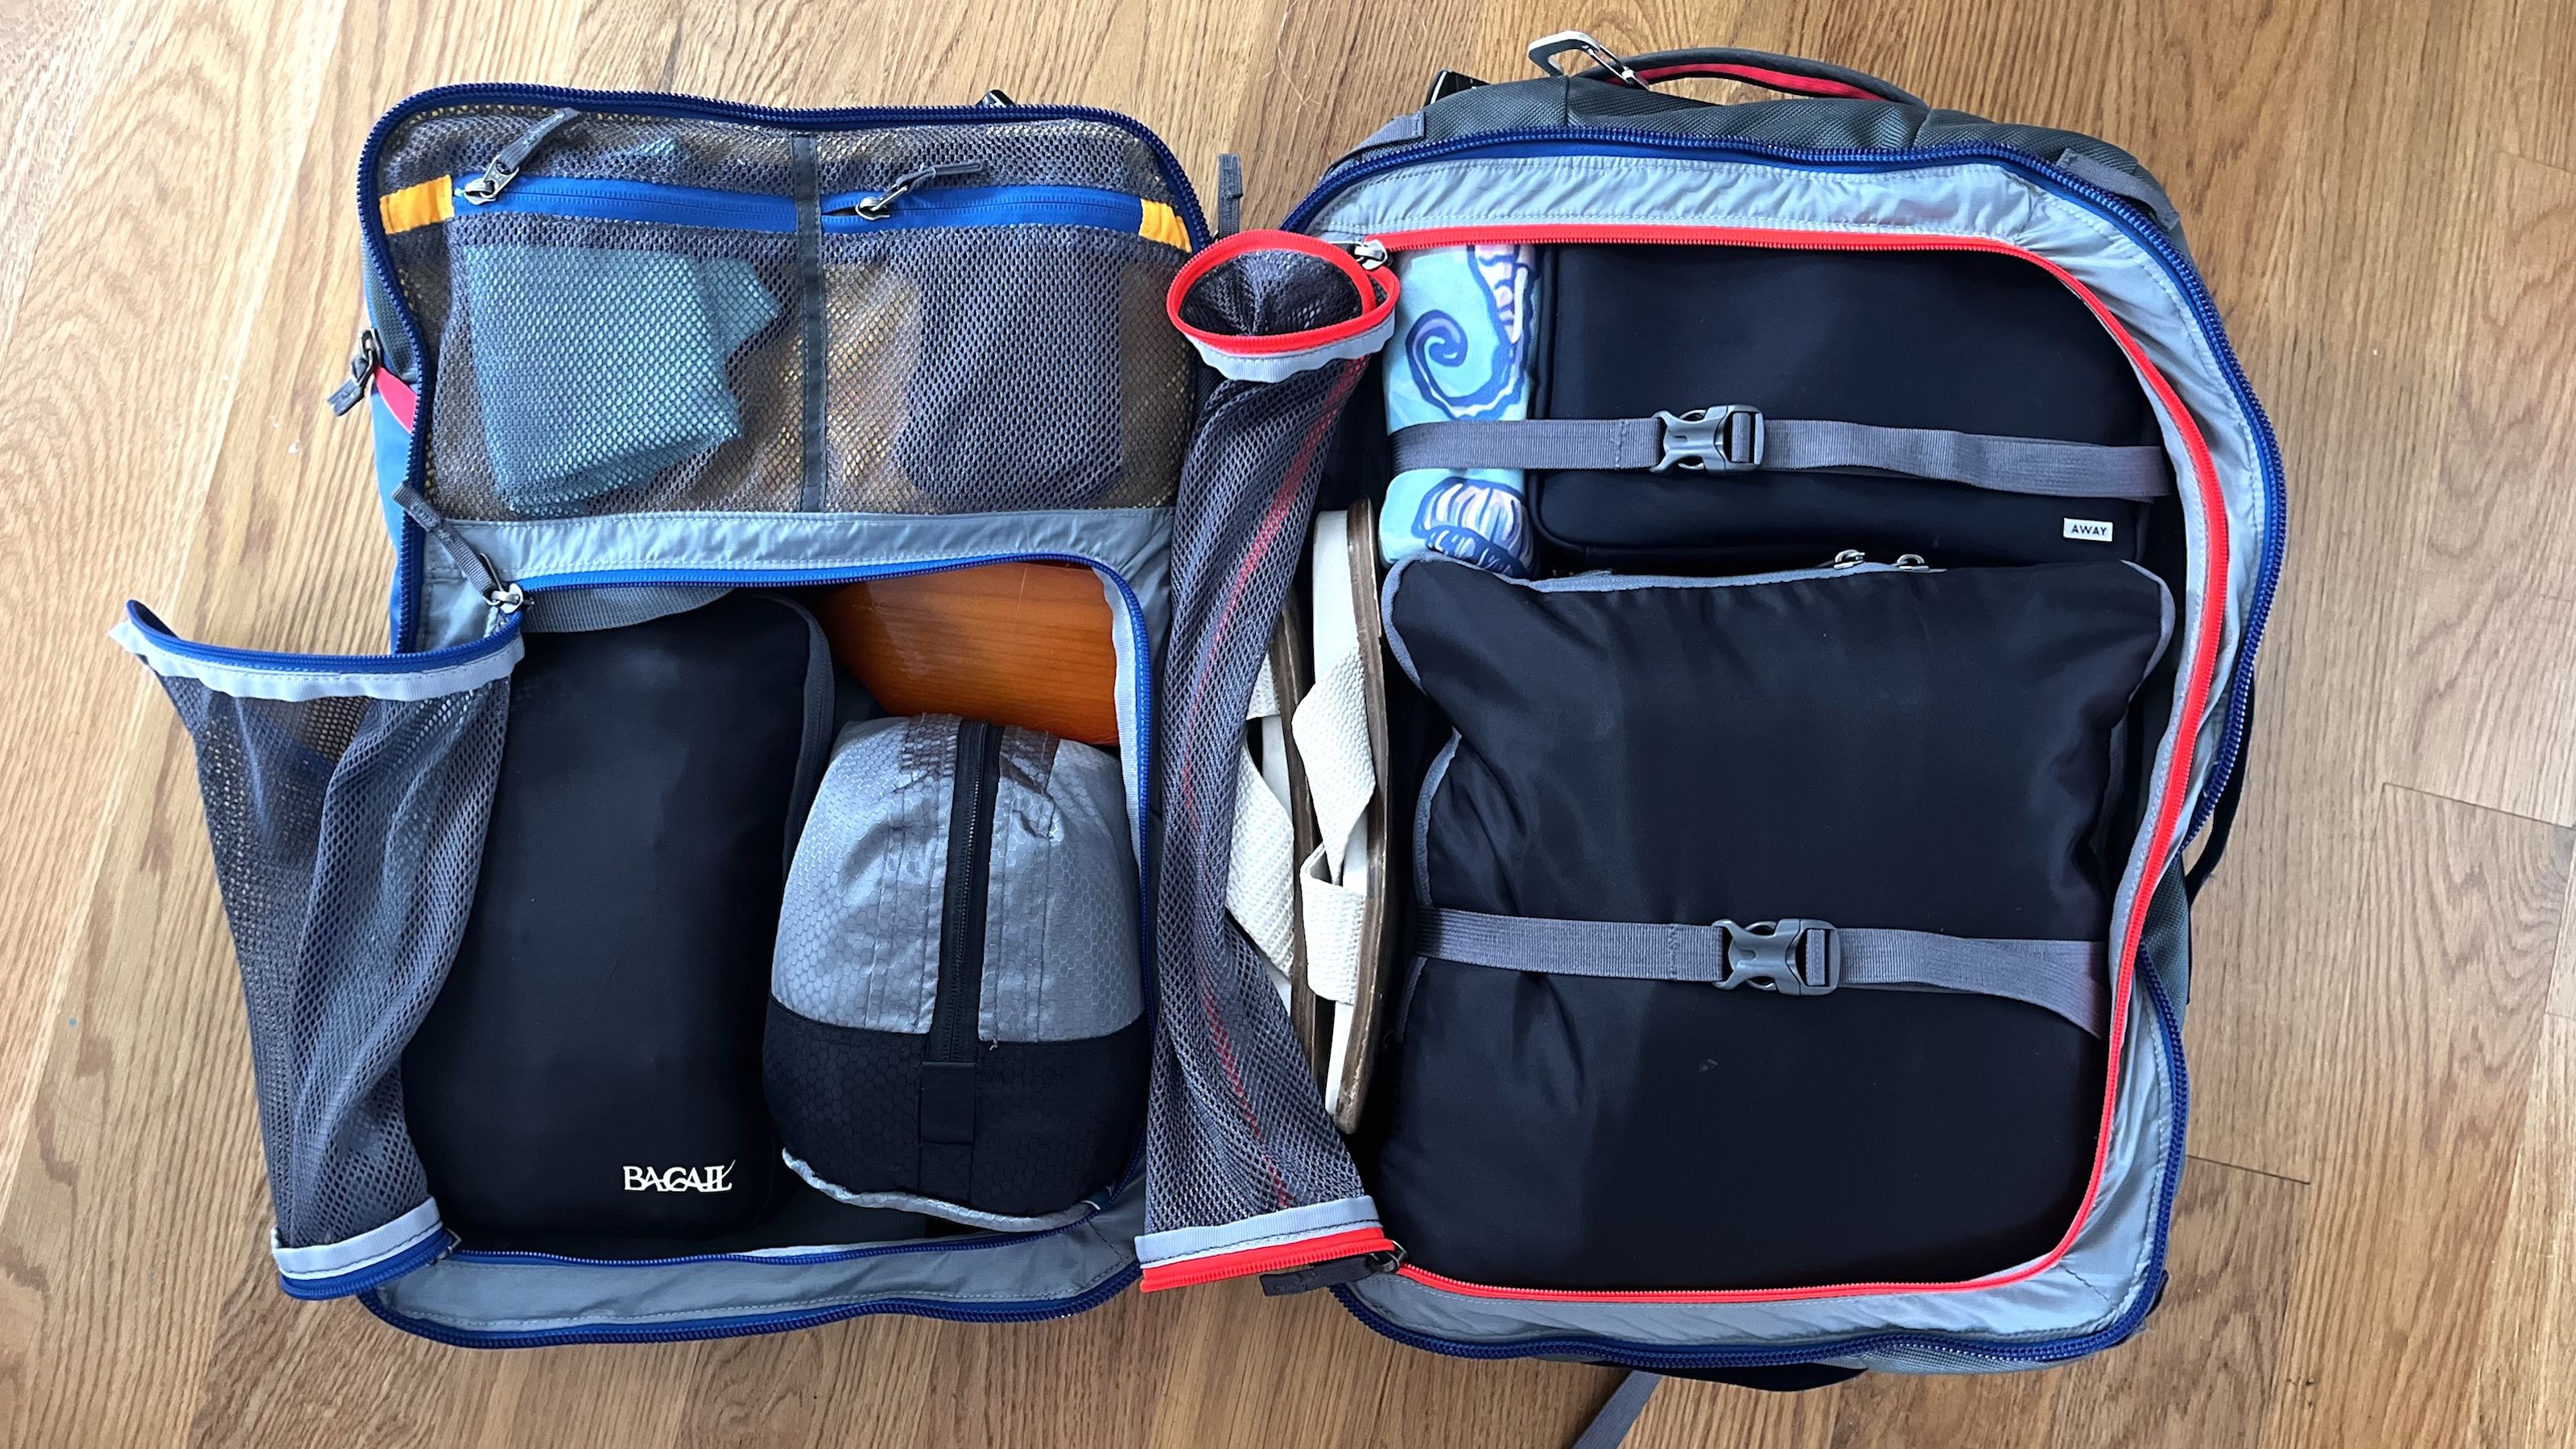 TRAVELING with BACKPACK or LUGGAGE? ✈️ Carry-on luggage